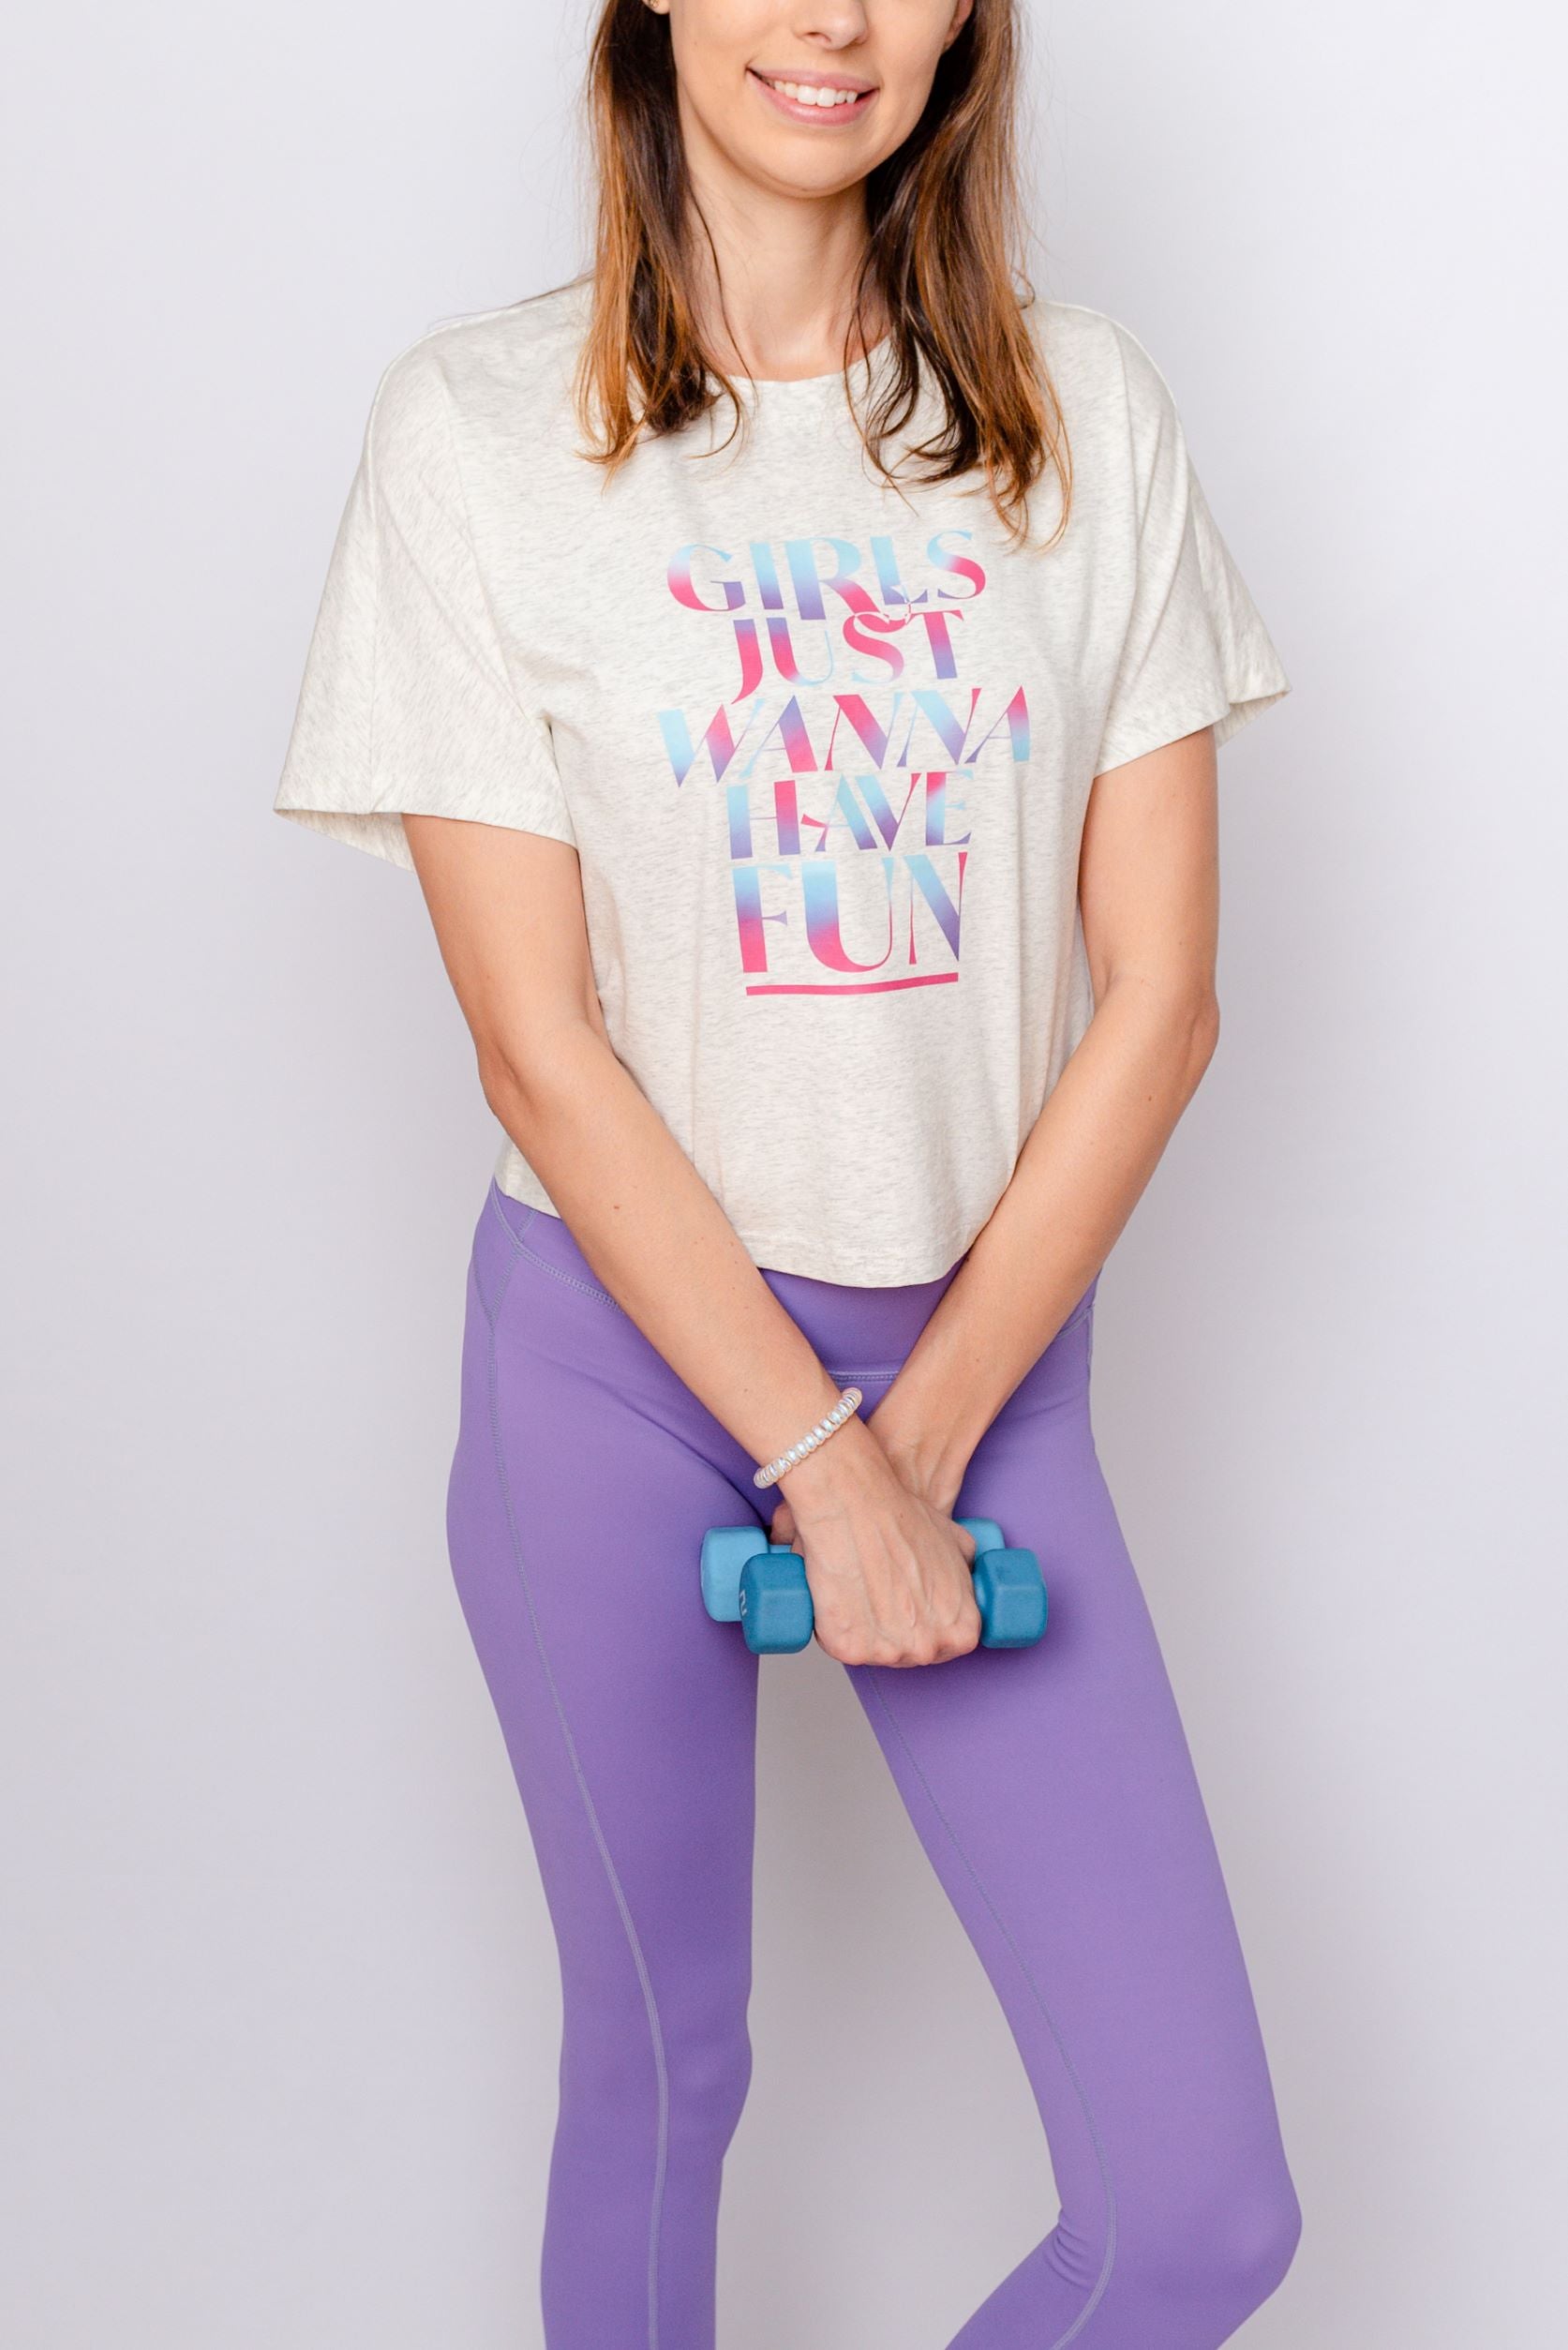 Girls Just Wanna Have Fun: Women's Mommy and Me Activewear Set